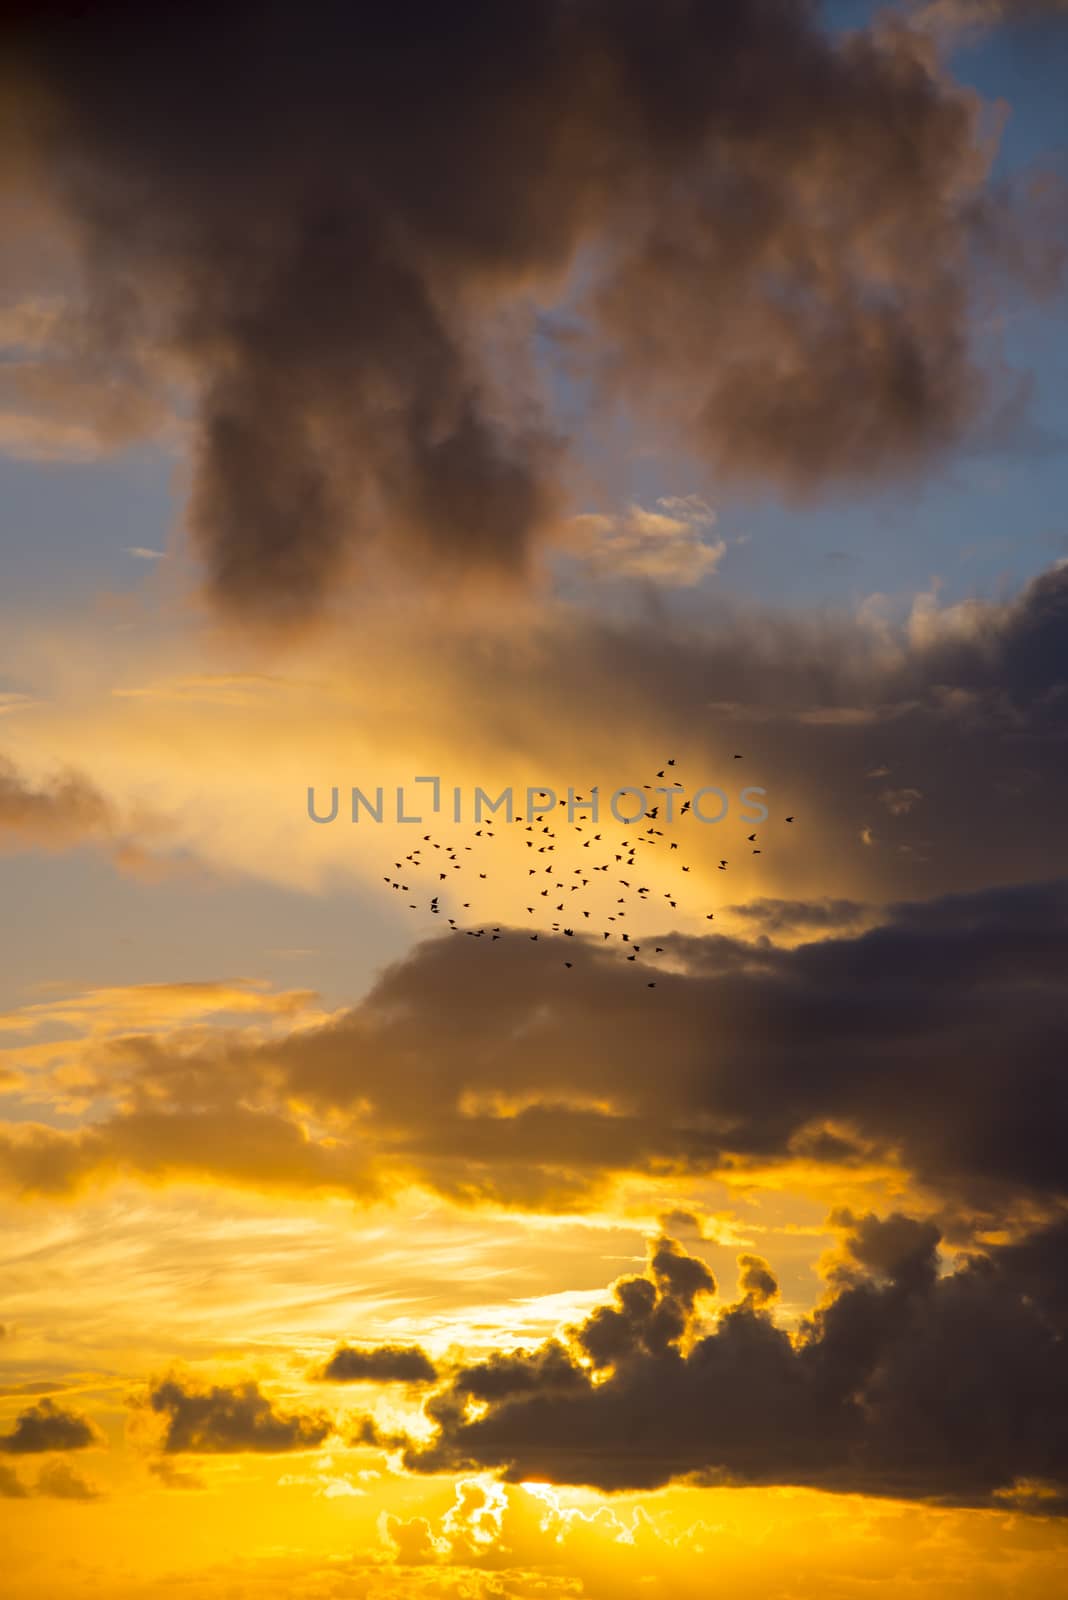 bright orange sunset sky with starlings by morrbyte